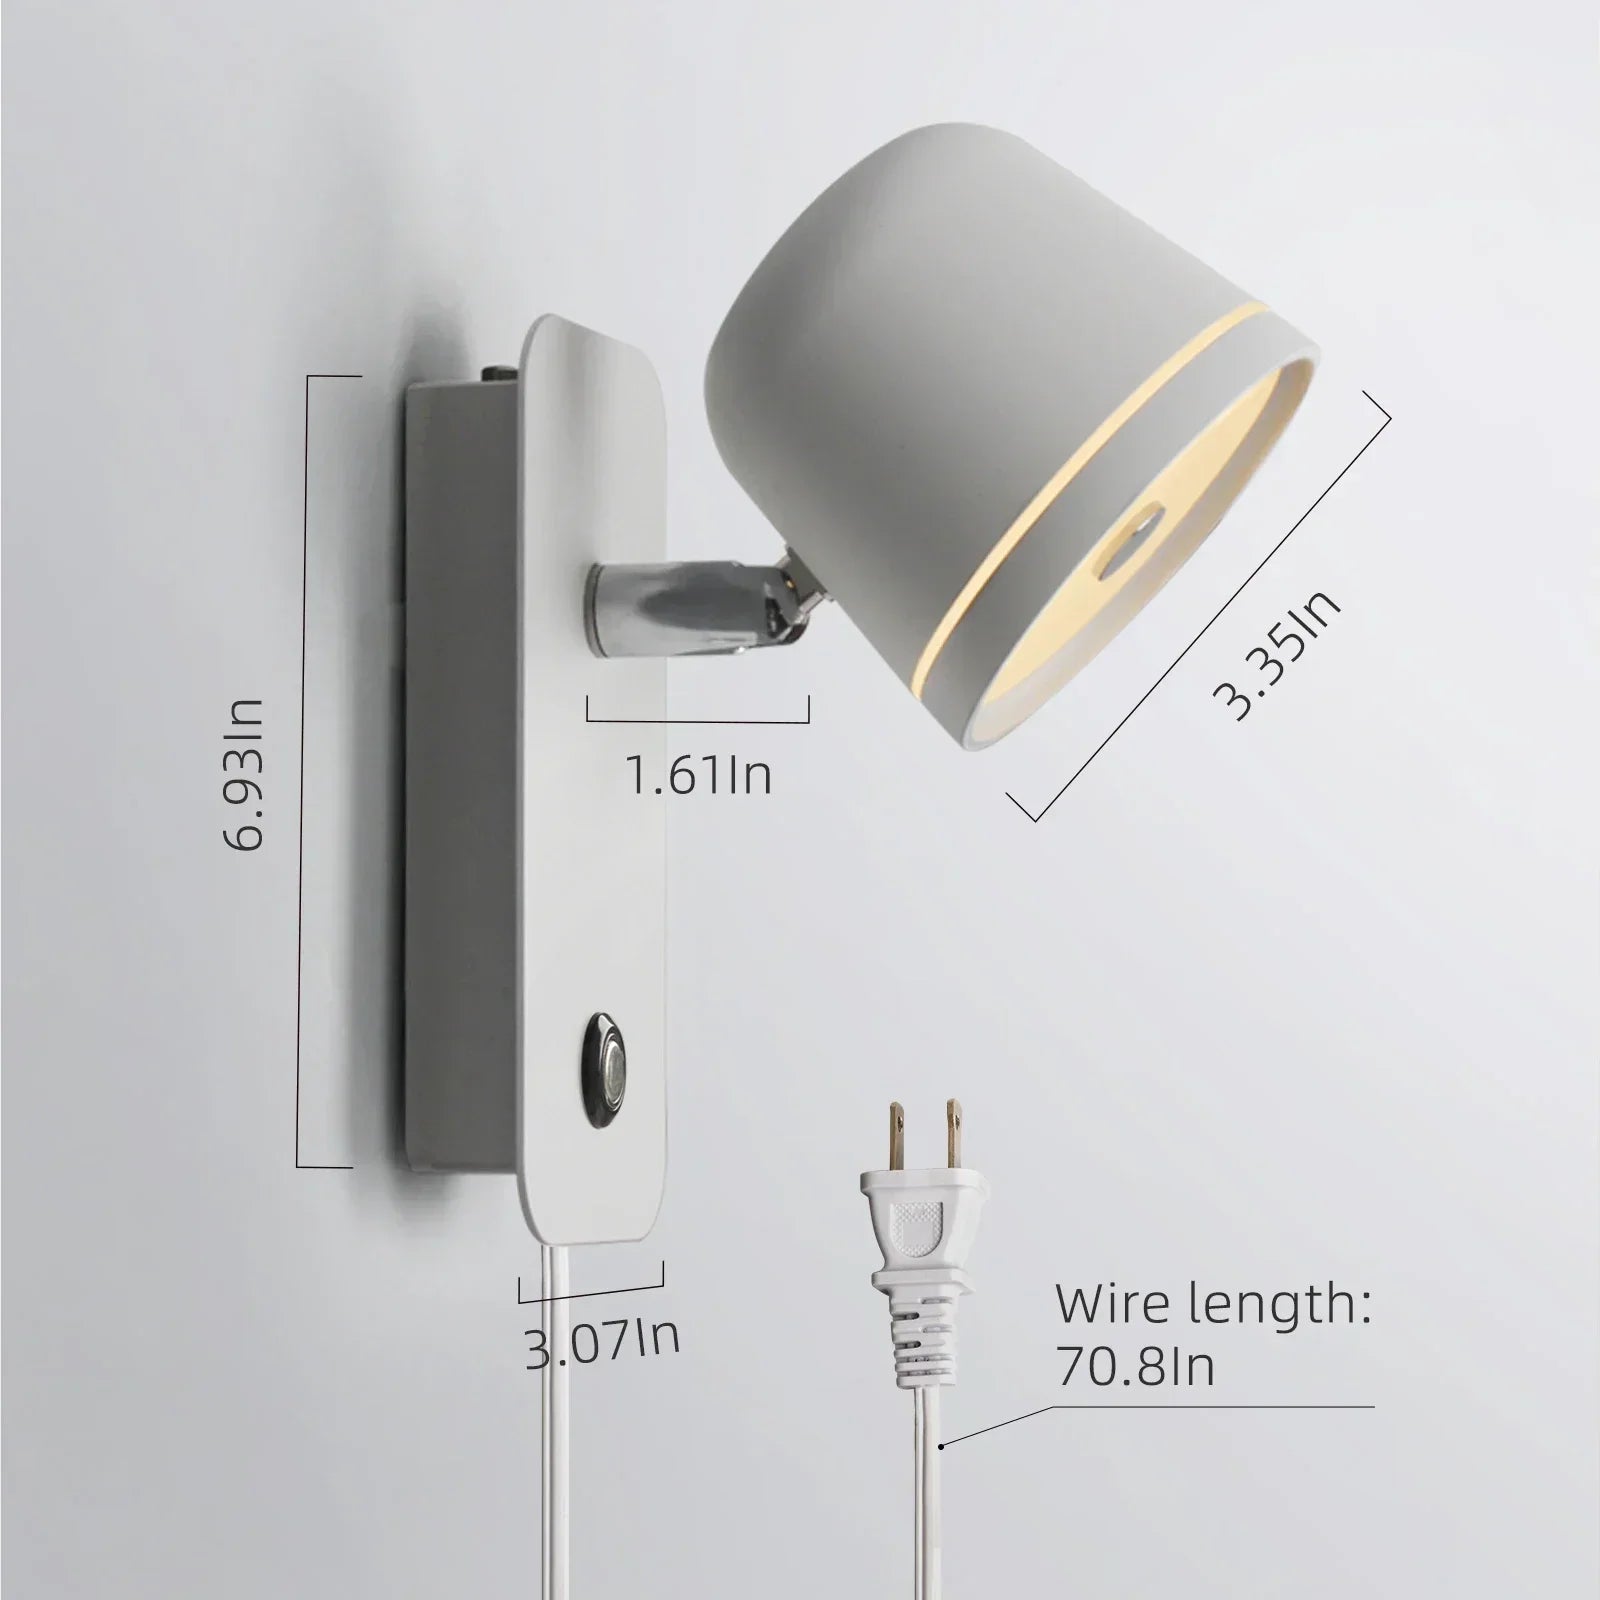 Rotatable Dimmable LED Wall Lamp Luca